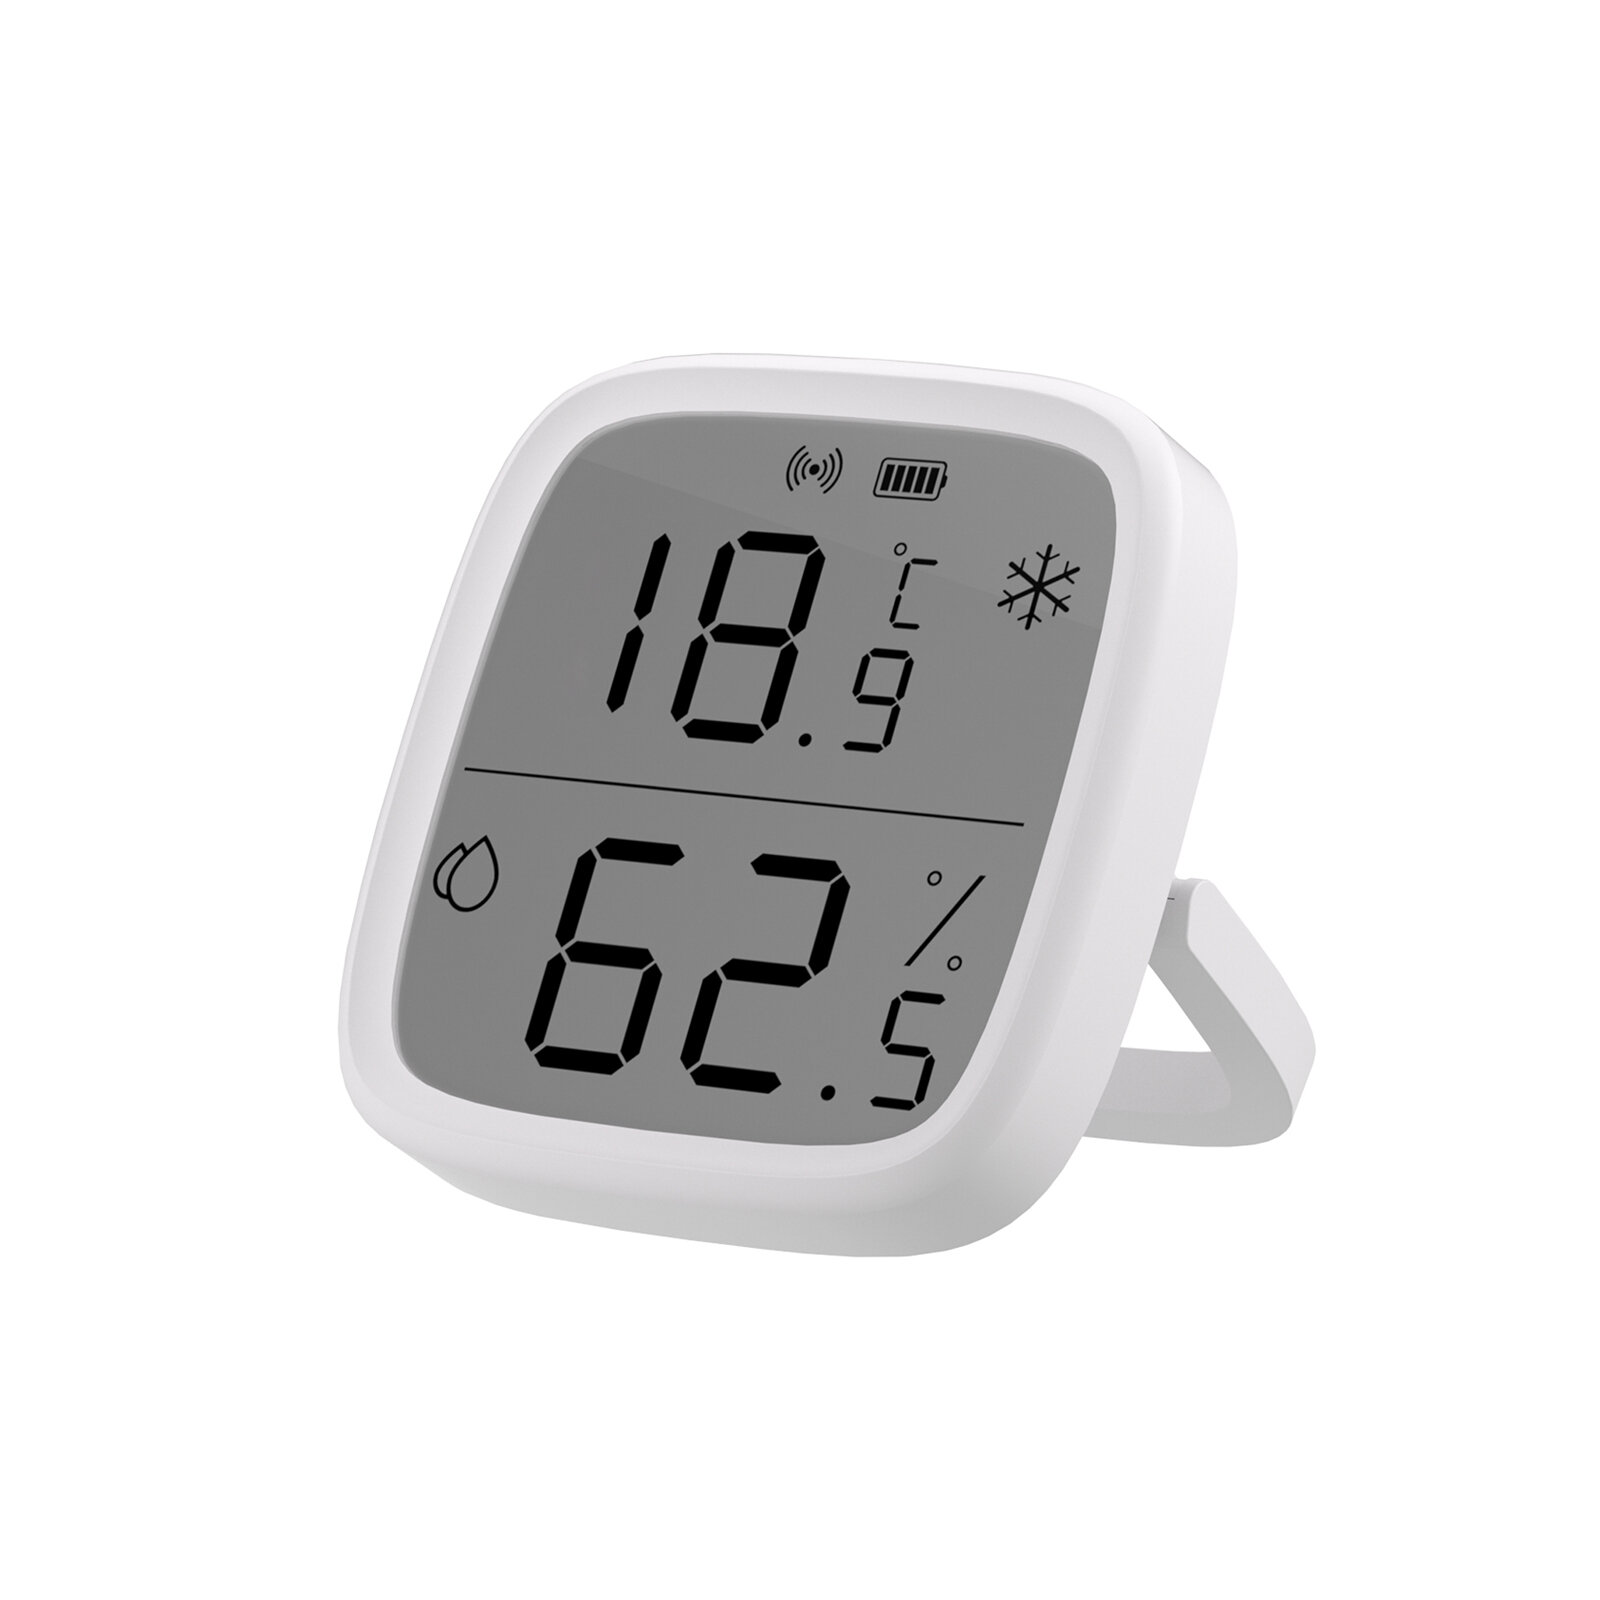 

SONOFF SNZB-02D LCD Smart Temperature Humidity Sensor APP Real-time Monitoring Work with ZB Bridge-P/ ZB Dongle/ NS Pane